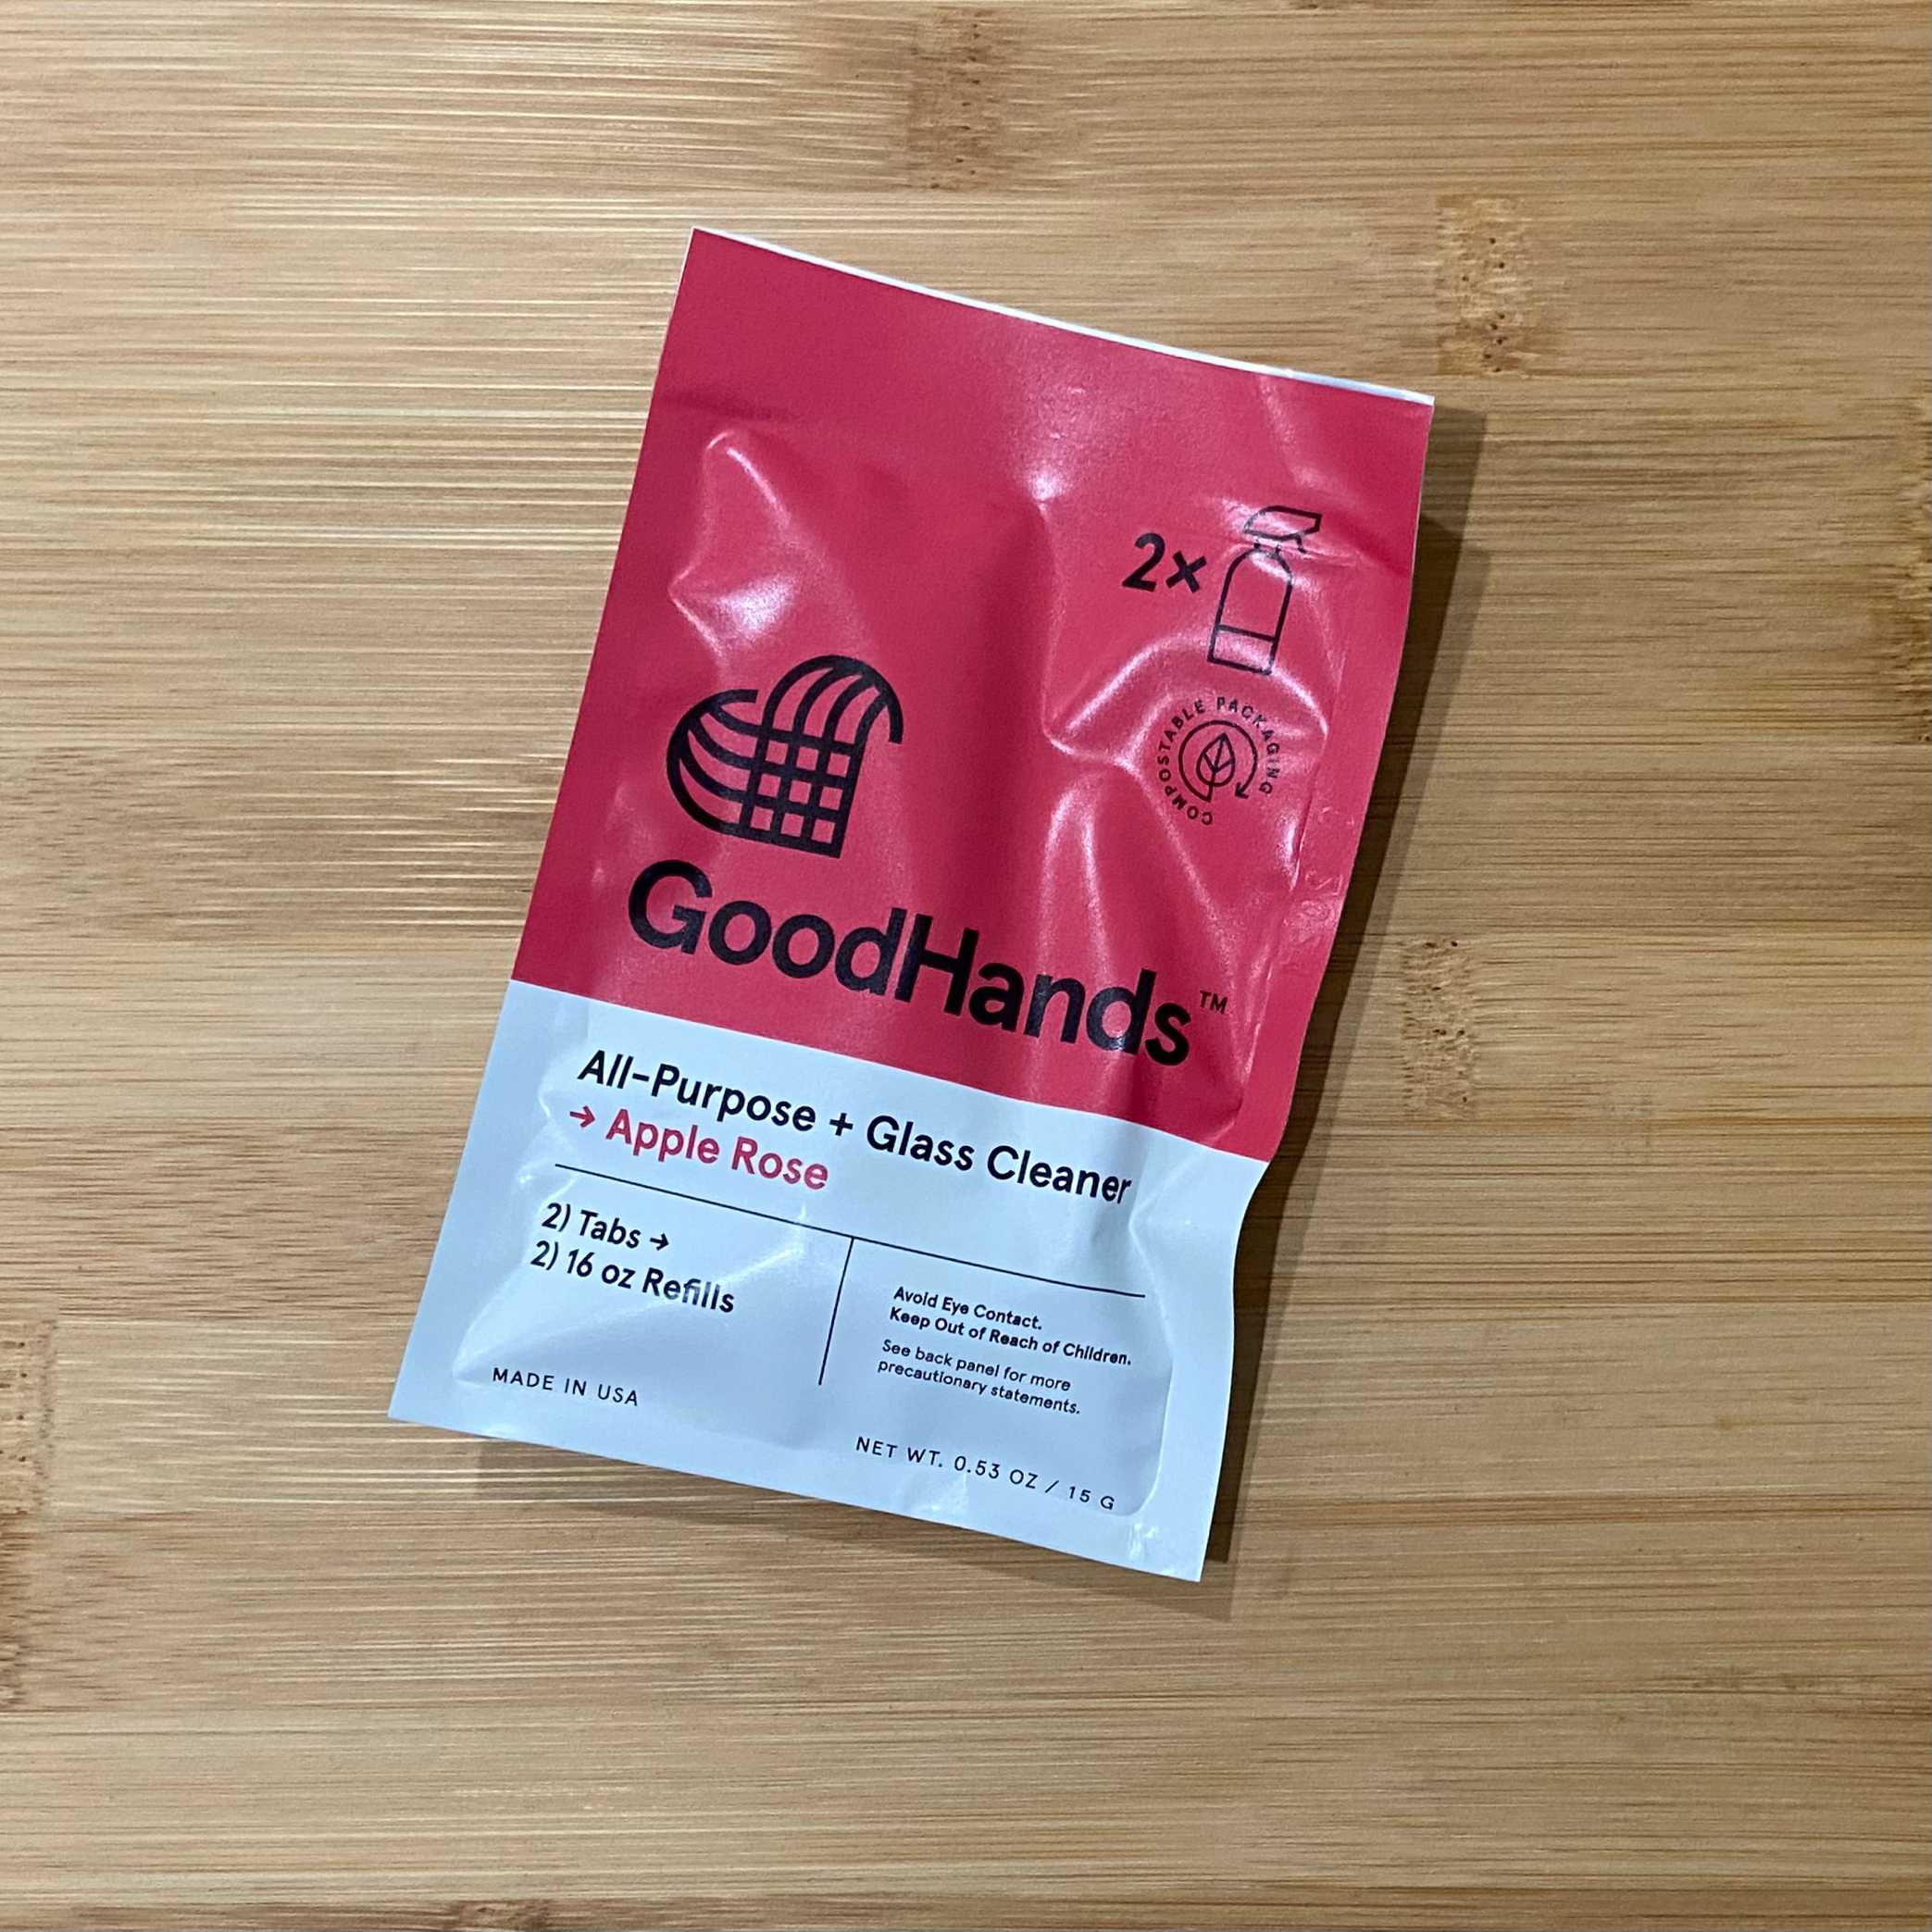 Good Hands All-Purpose + Glass Cleaner